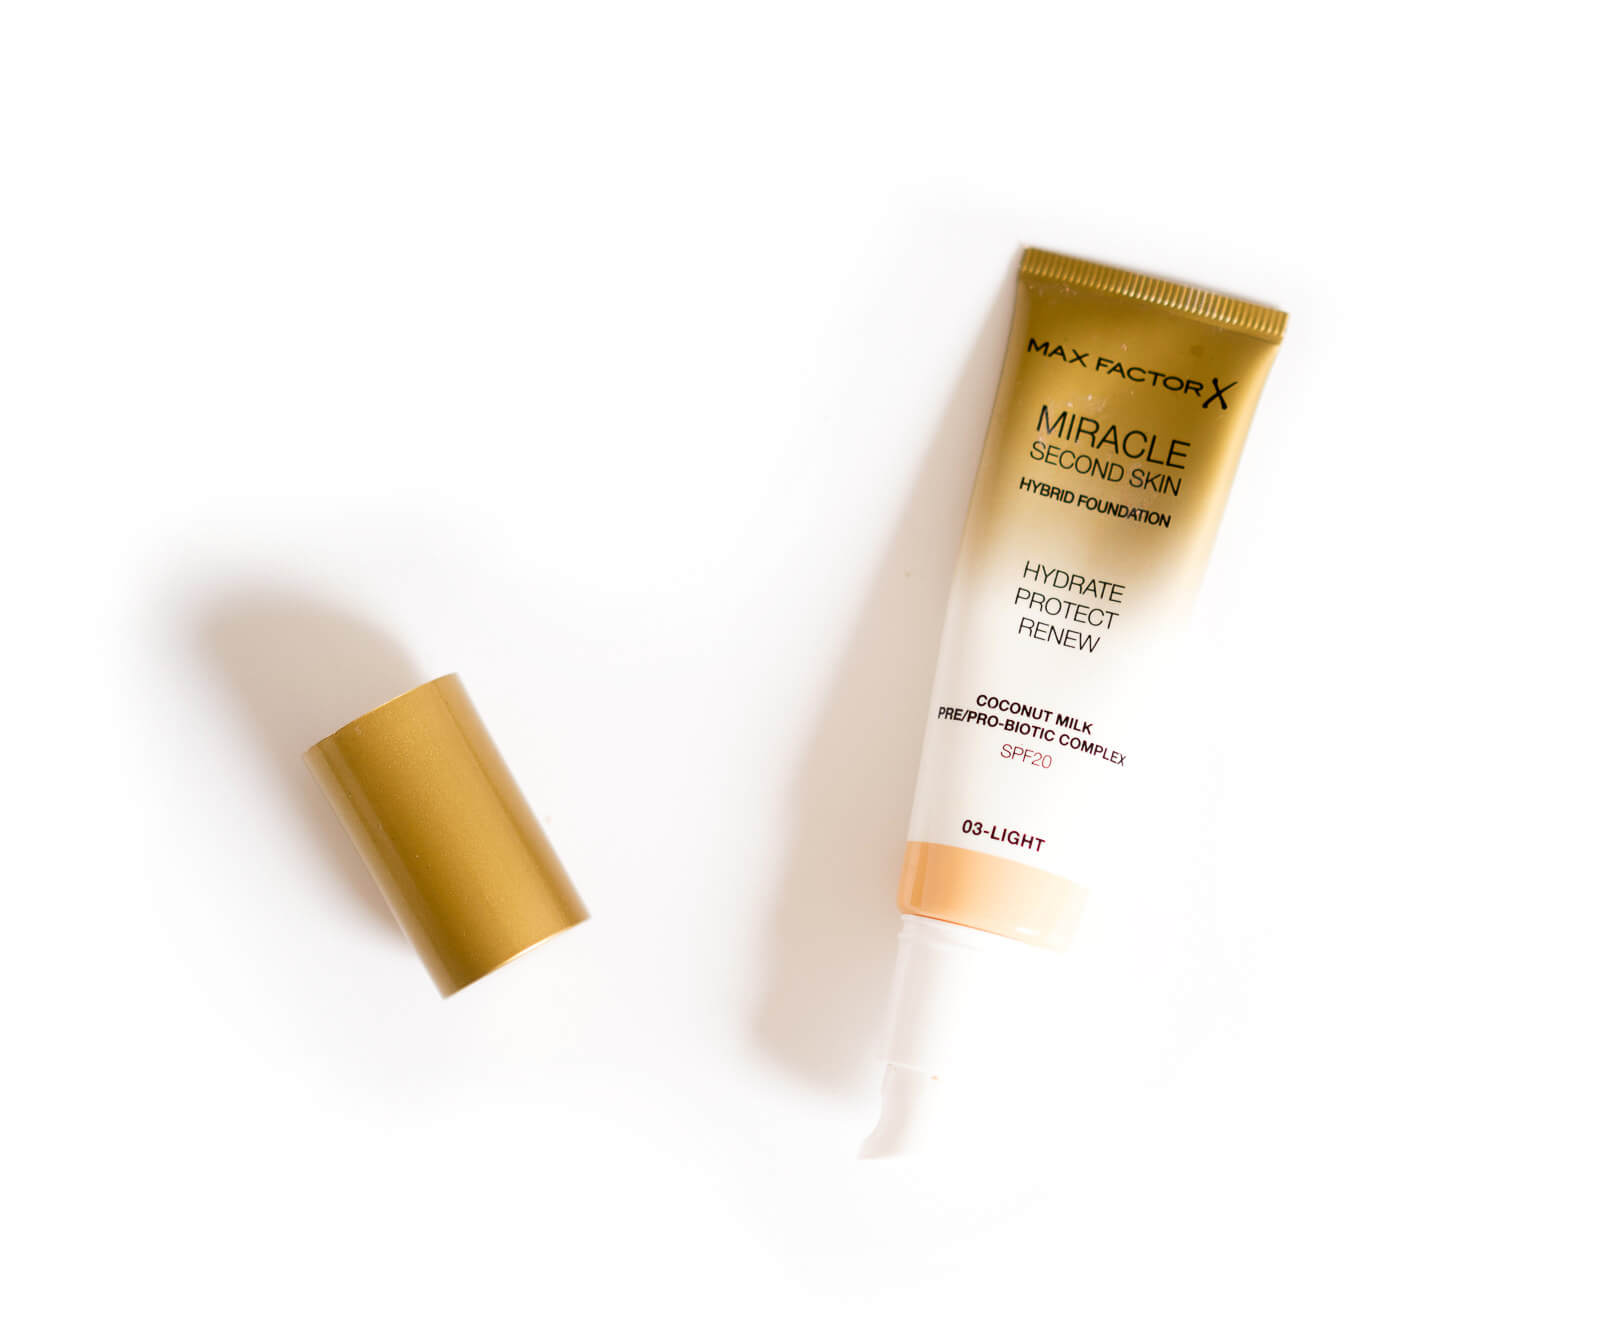 Review - Max Factor Miracle Second Skin Foundation im Test 2